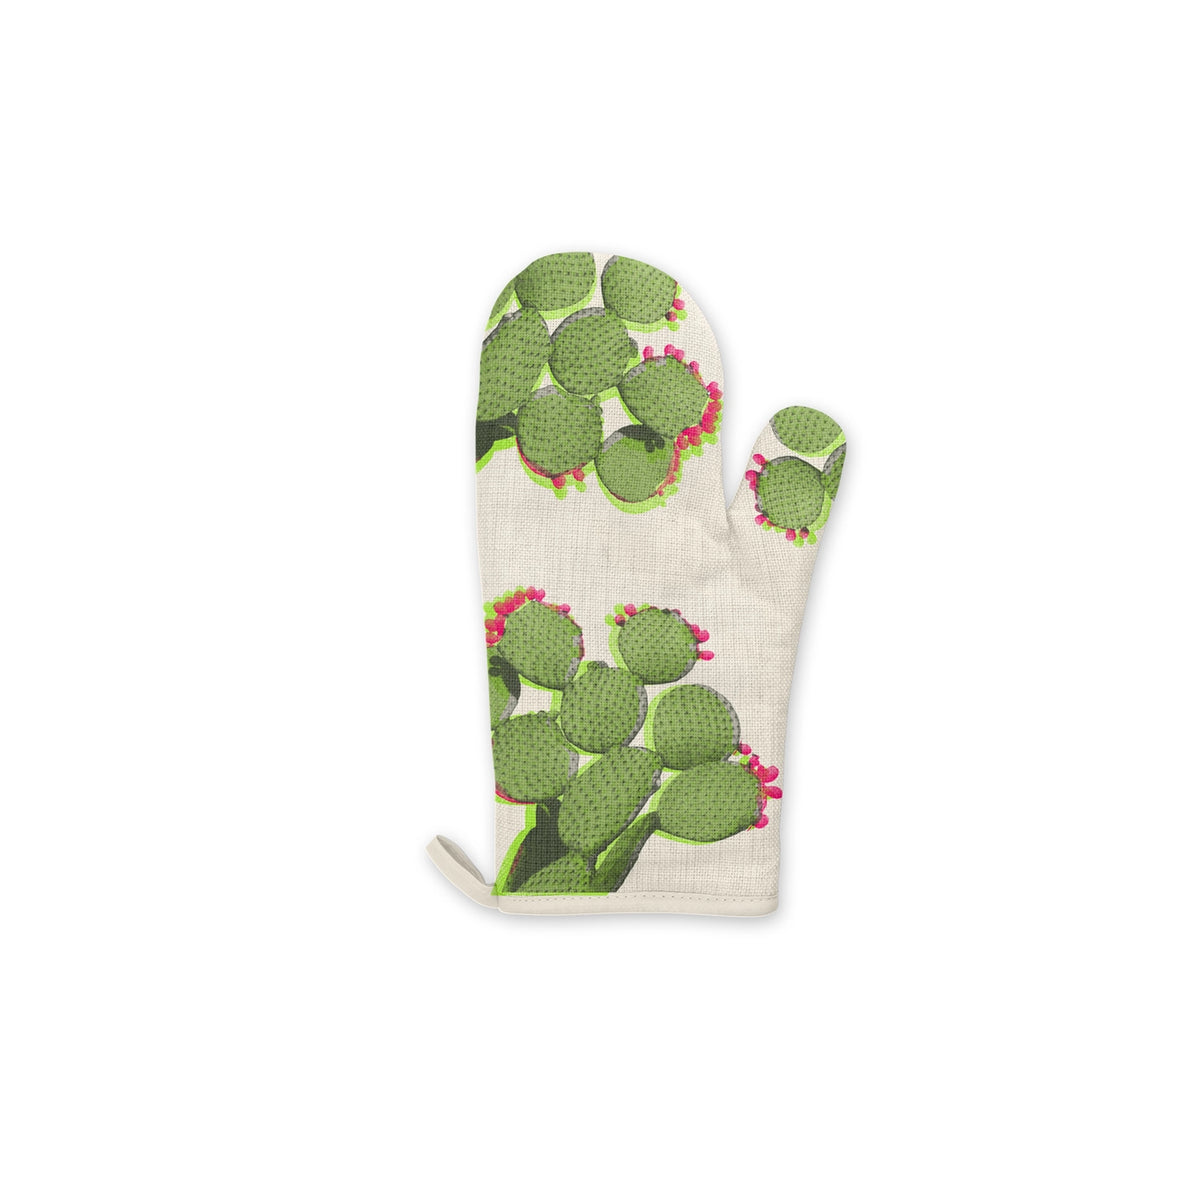 Prickly Pear Oven Mitts